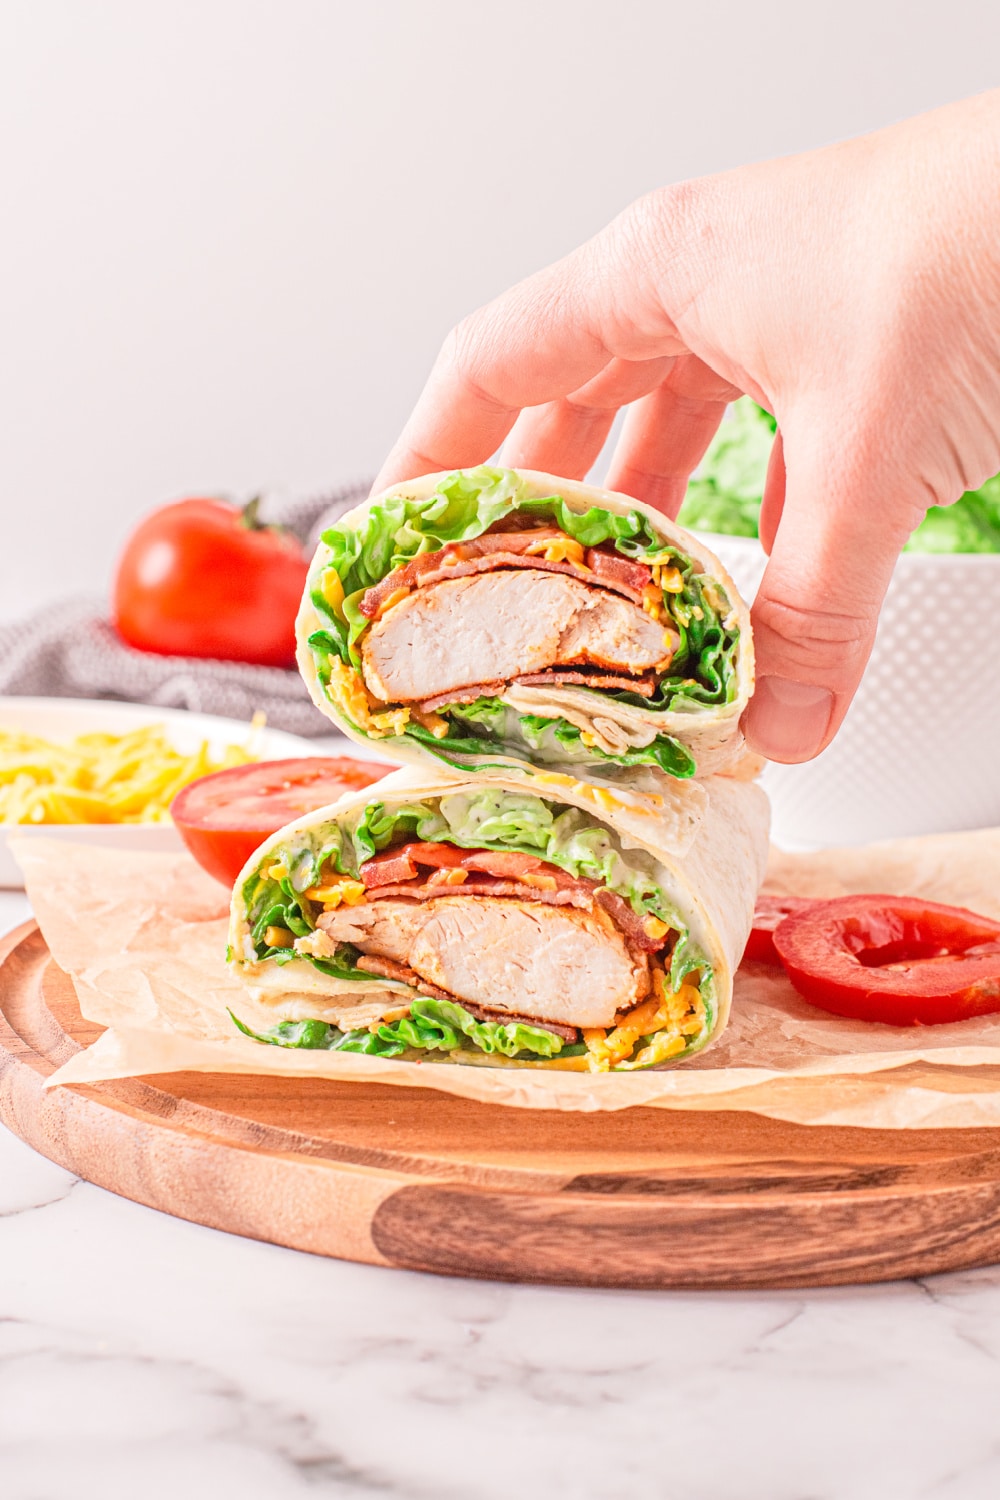 A woman's hand reaches to pick up a prepared wrap sitting on a wood cutting board.